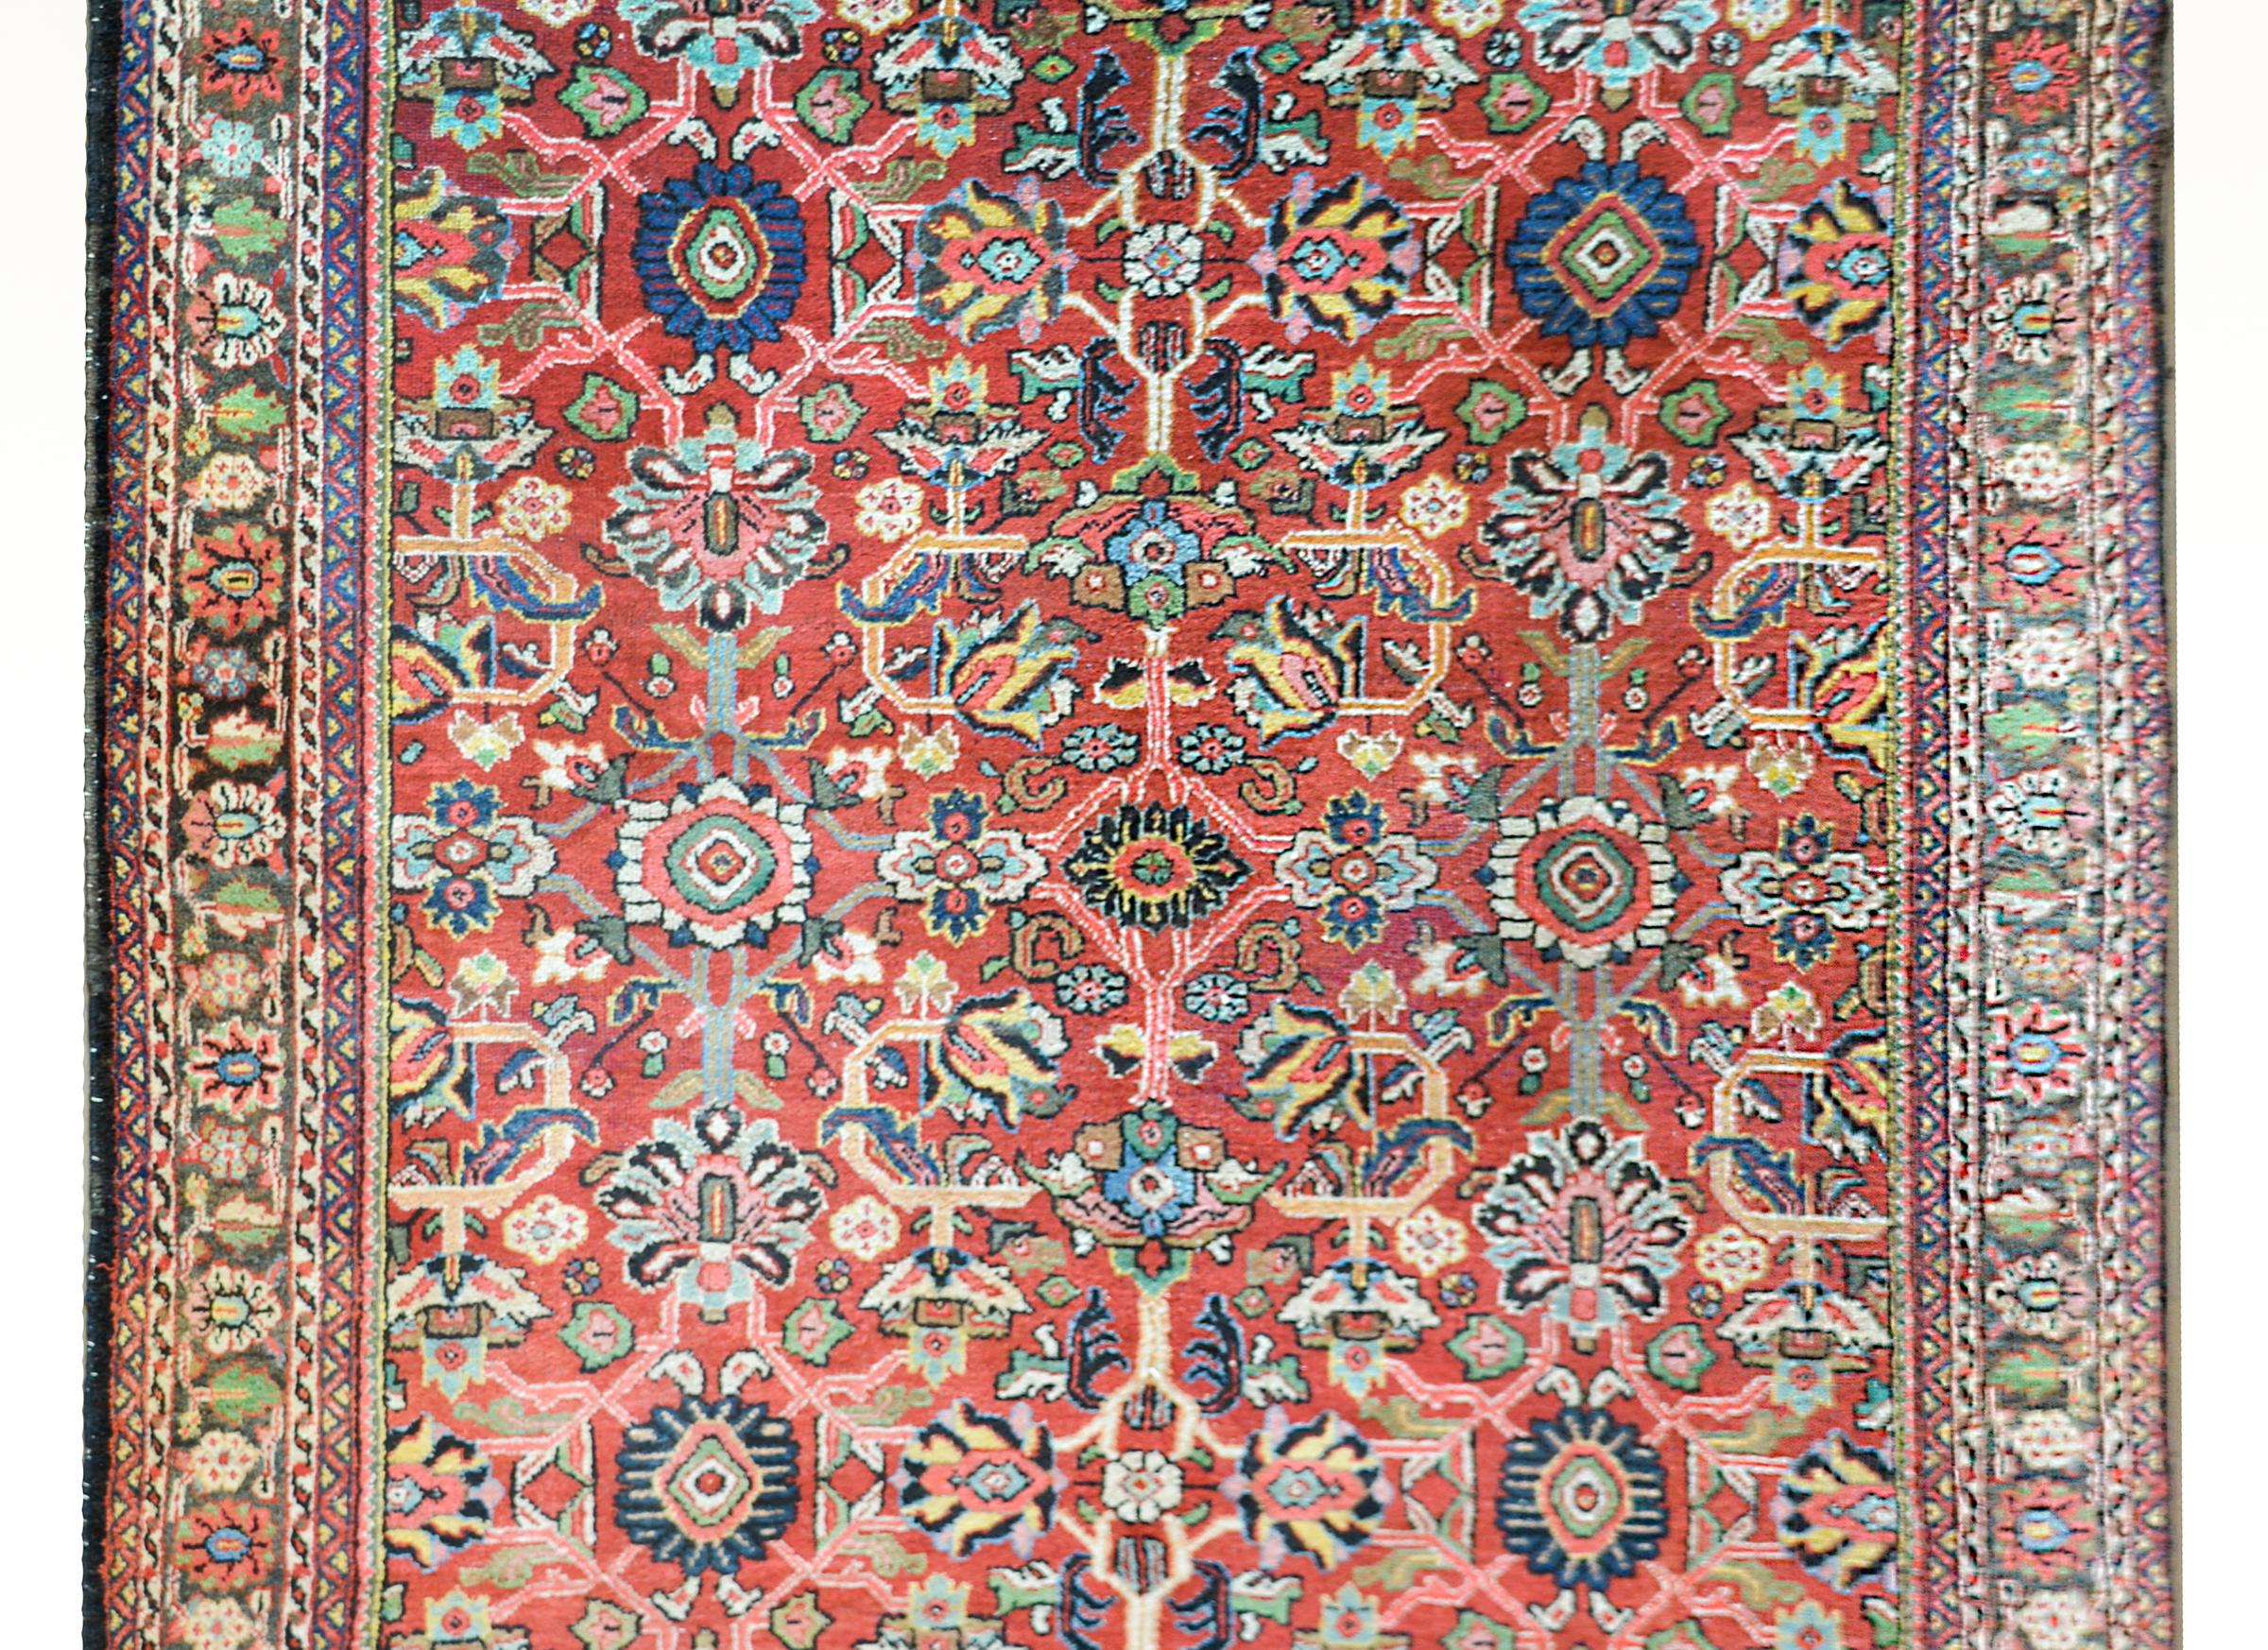 A gorgeous early 20th century Persian Mahal rug with an all-over tribally woven pattern with multiple stylized flowers and scrolling vines woven in myriad colors against a crimson background, and surrounded by a border with multiple stylized floral